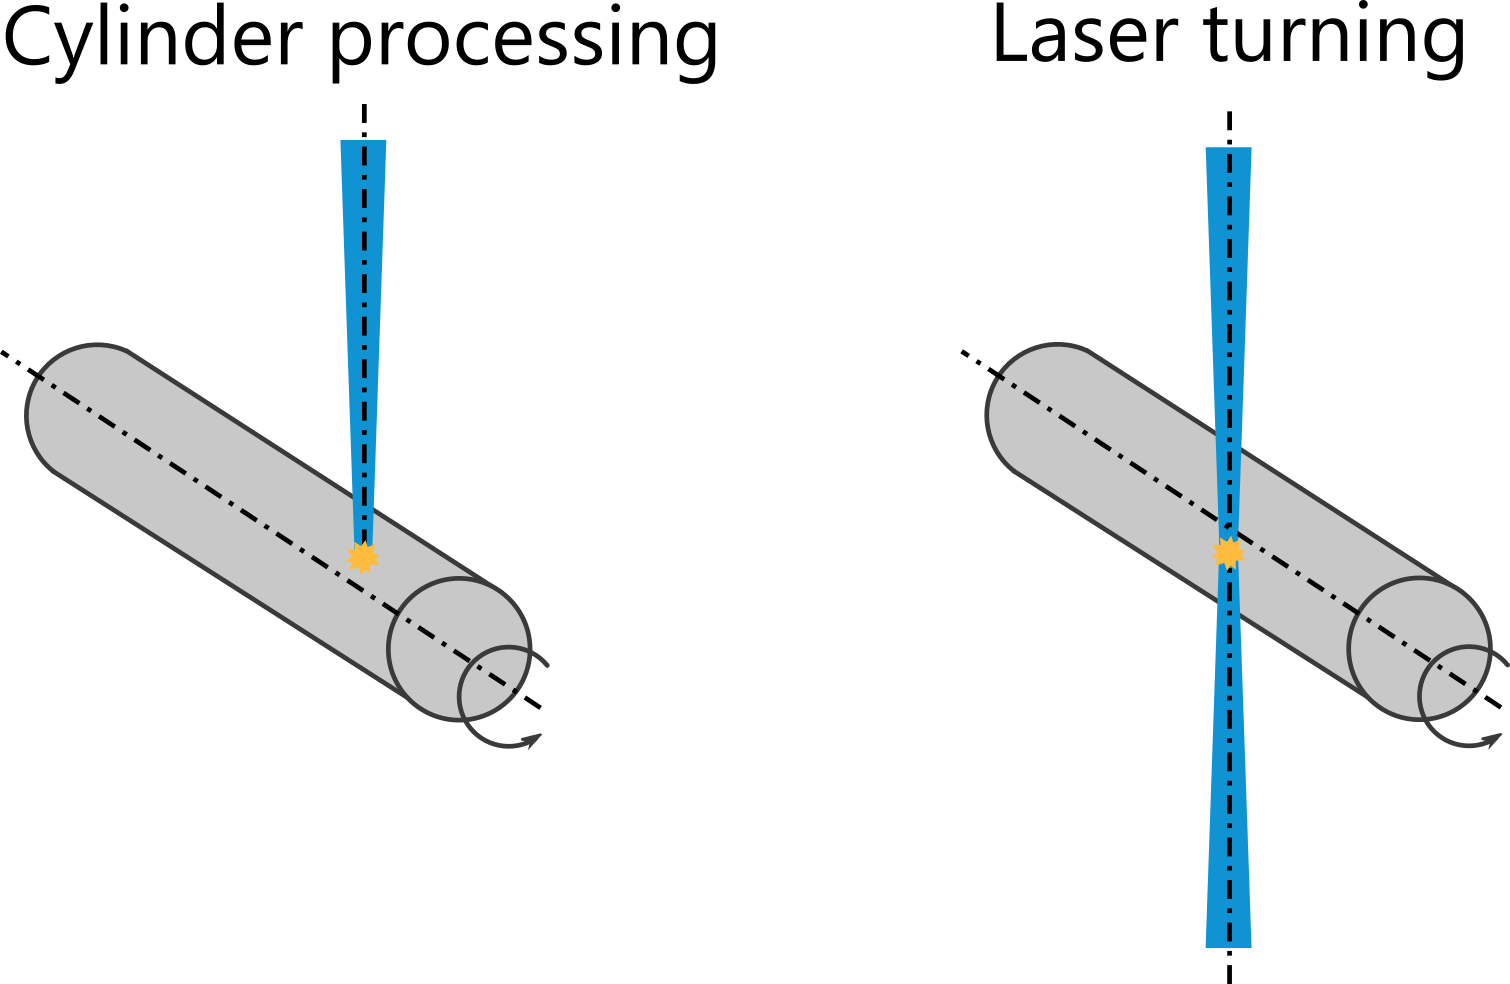 Cylinder processing and laser turning